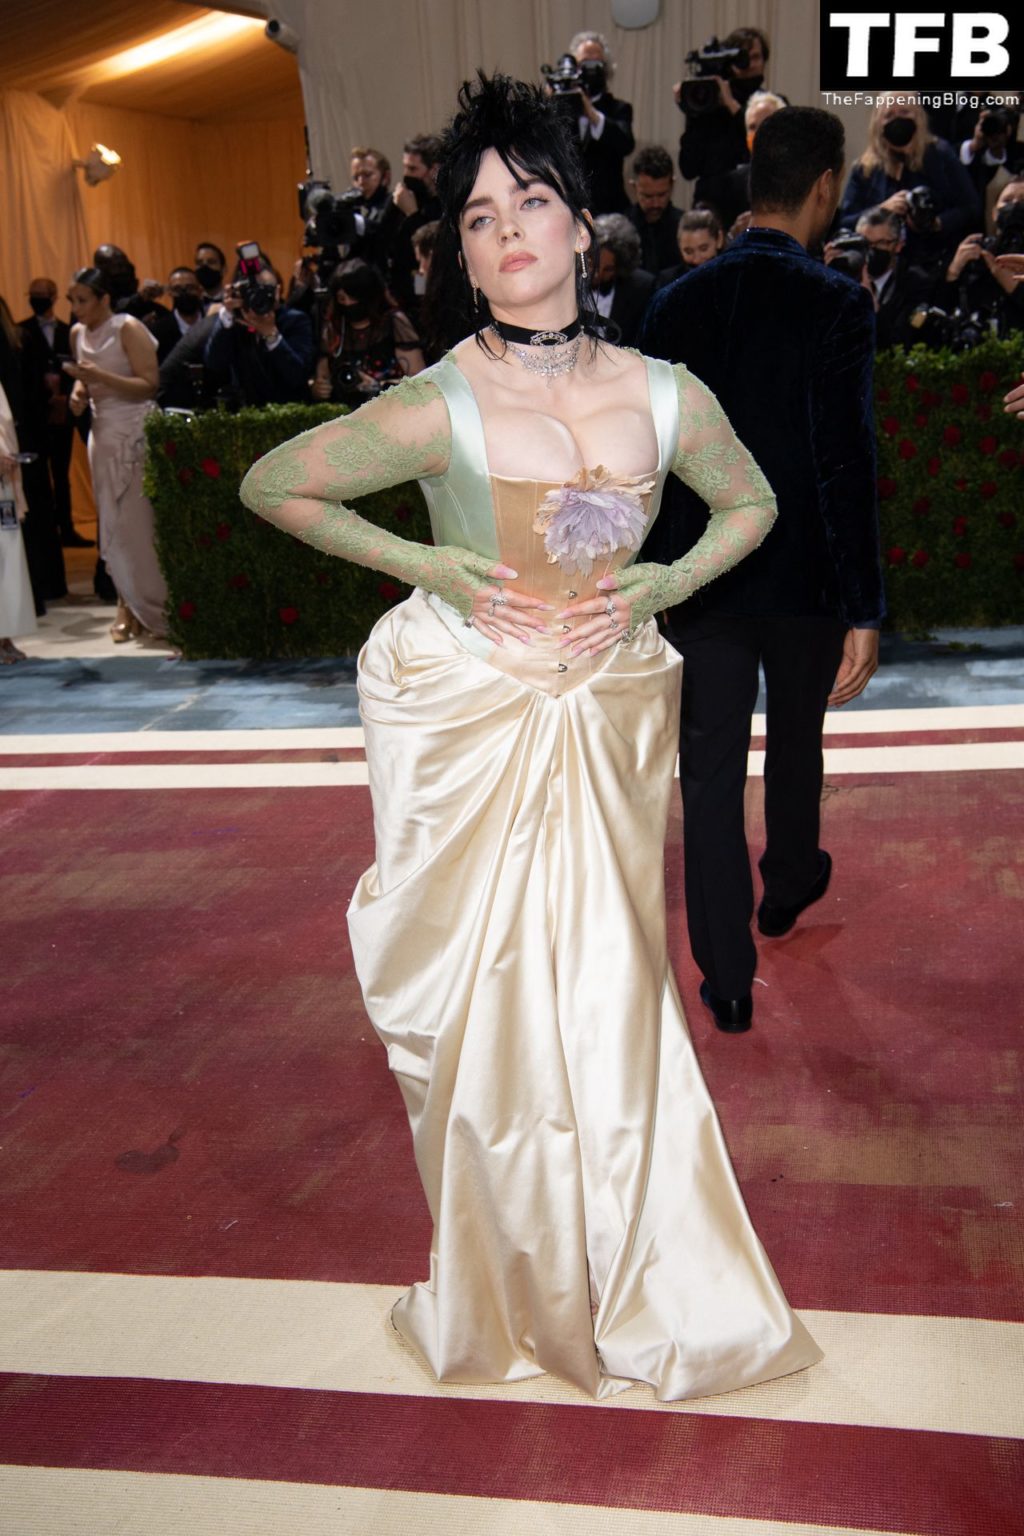 Billie Eilish Sexy The Fappening Blog 21 1024x1536 - Billie Eilish Showcases Nice Cleavage at The 2022 Met Gala in NYC (155 Photos)